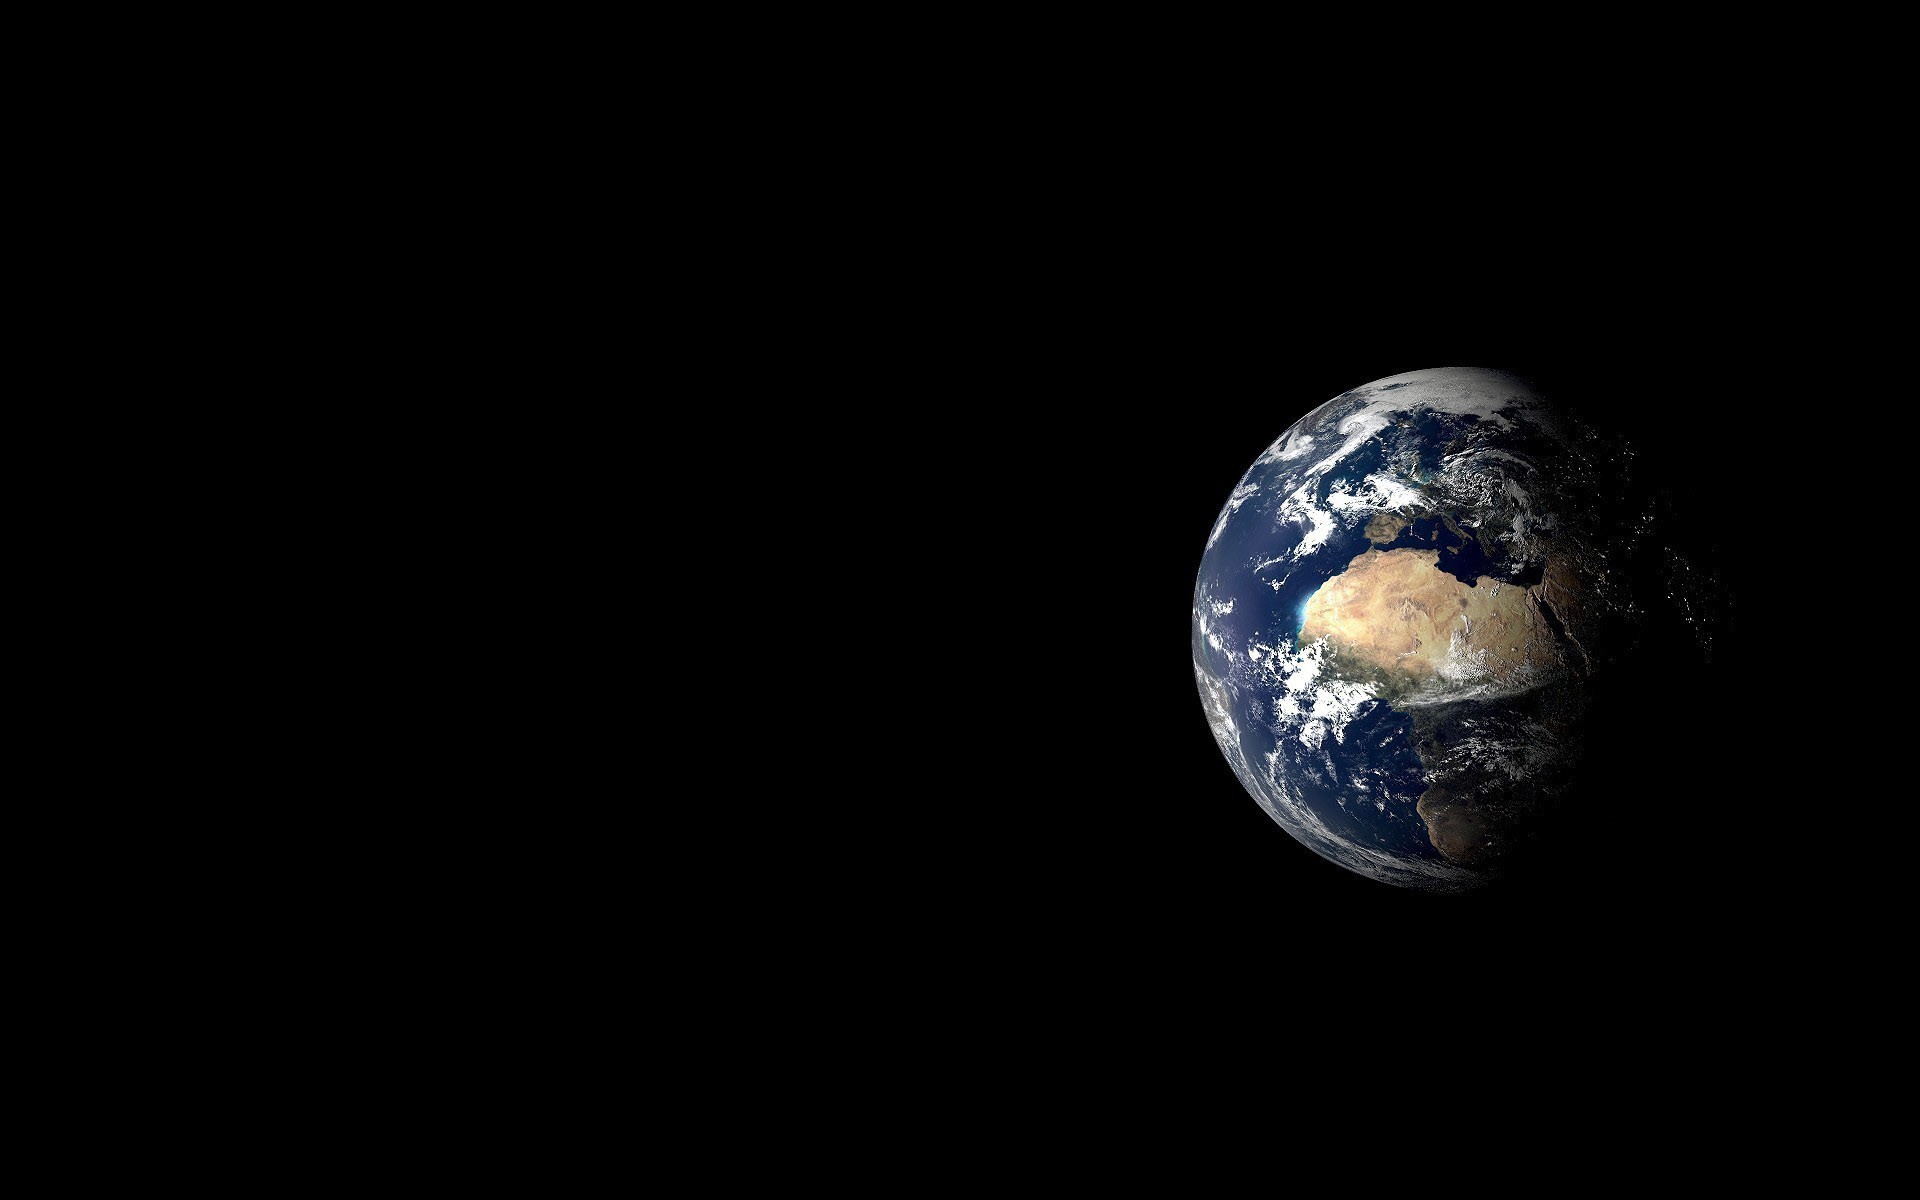 Earth Background